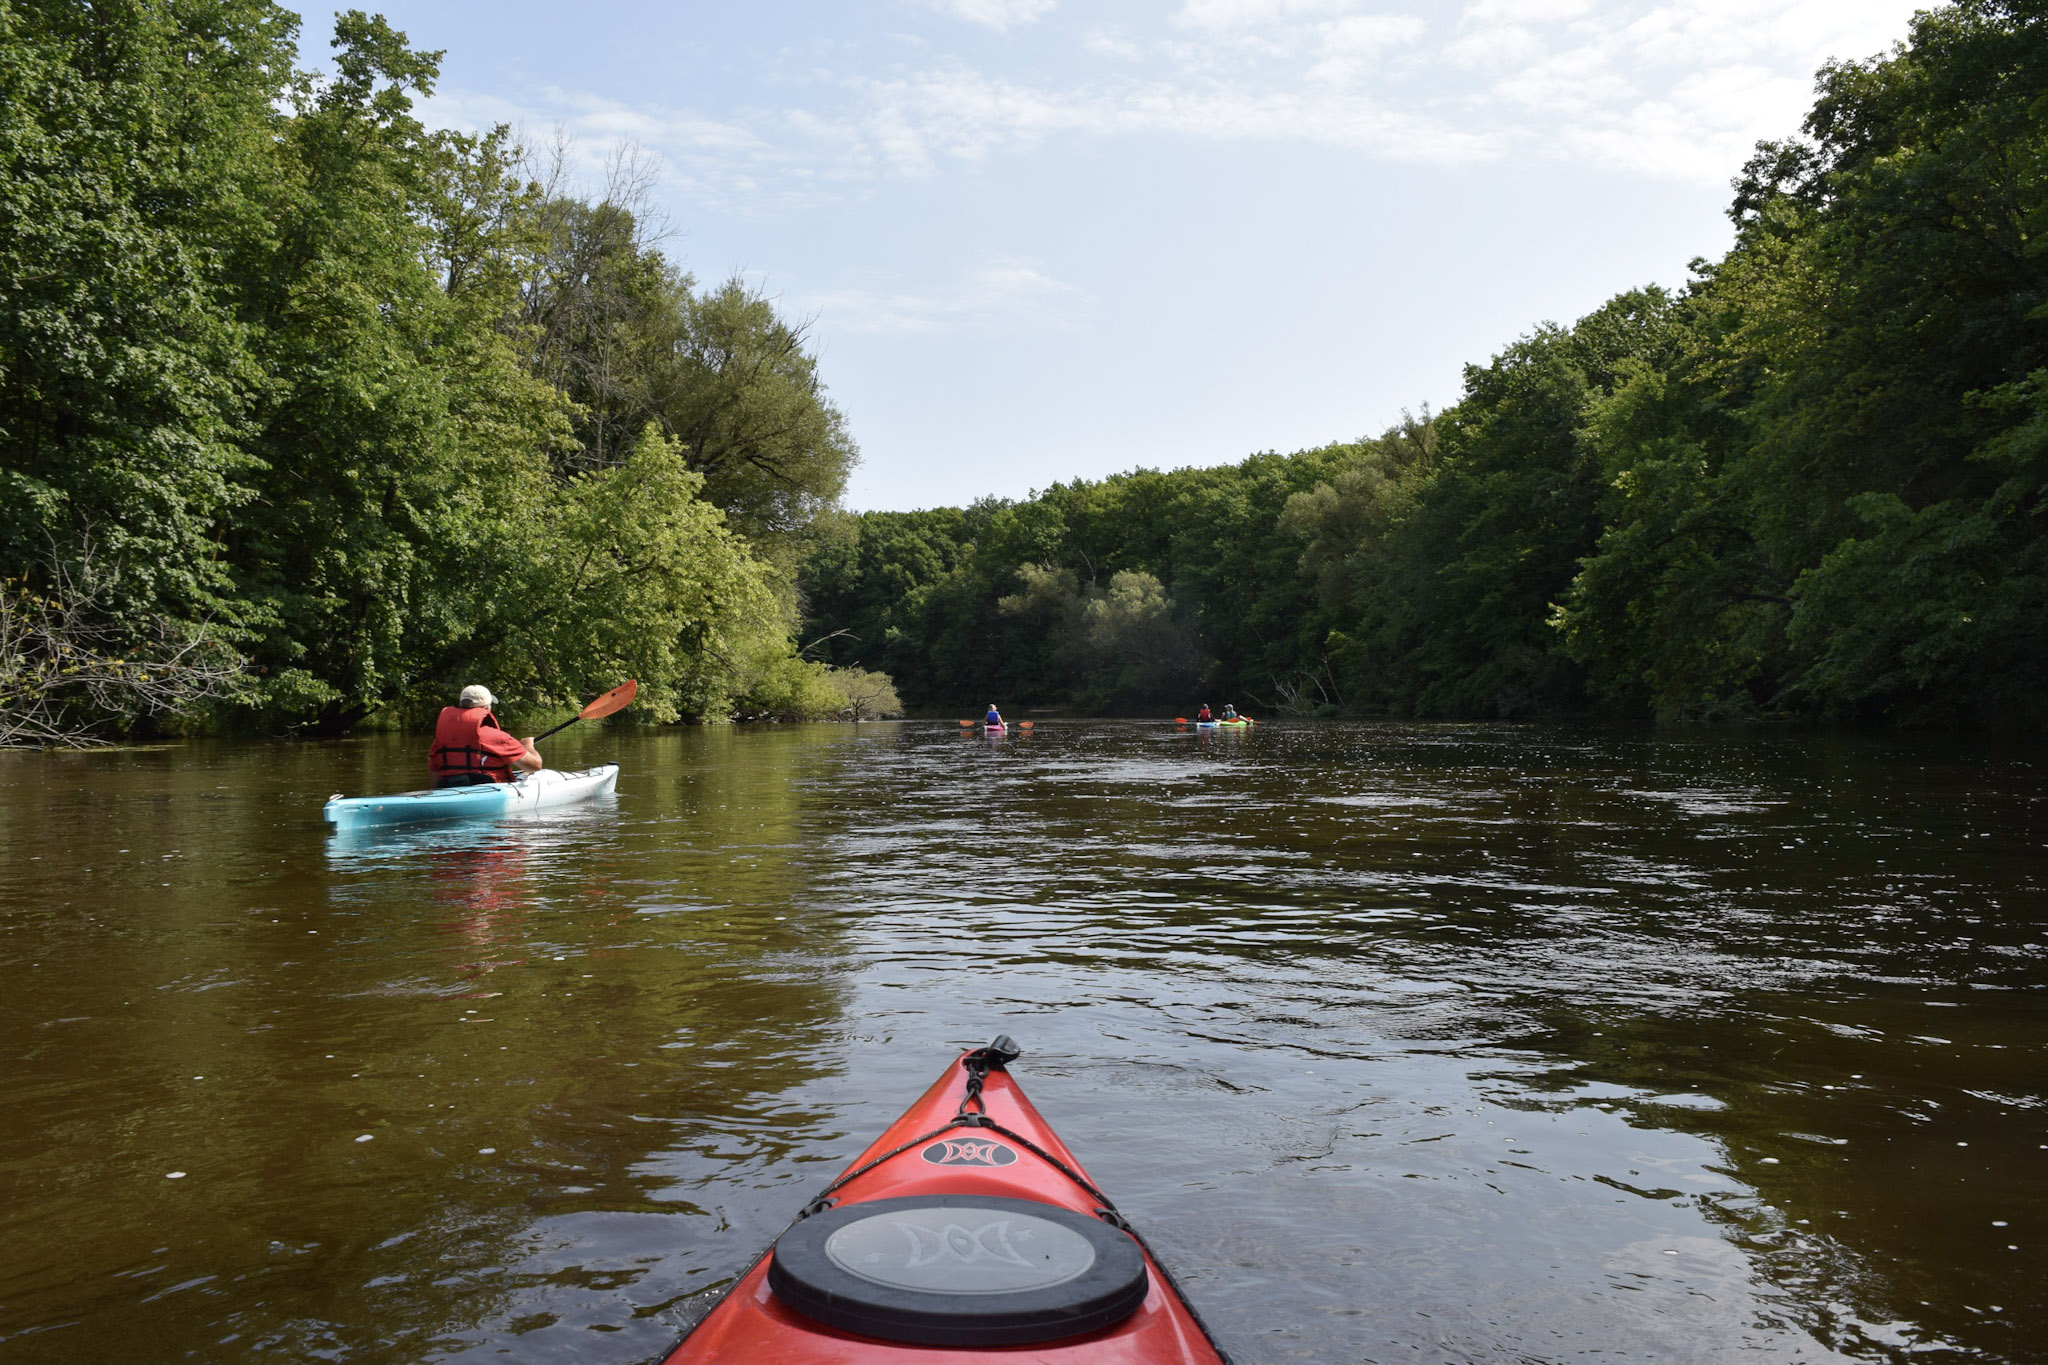 view facing forward in a kayak on the Milwaukee River with other kayaks seen on the water